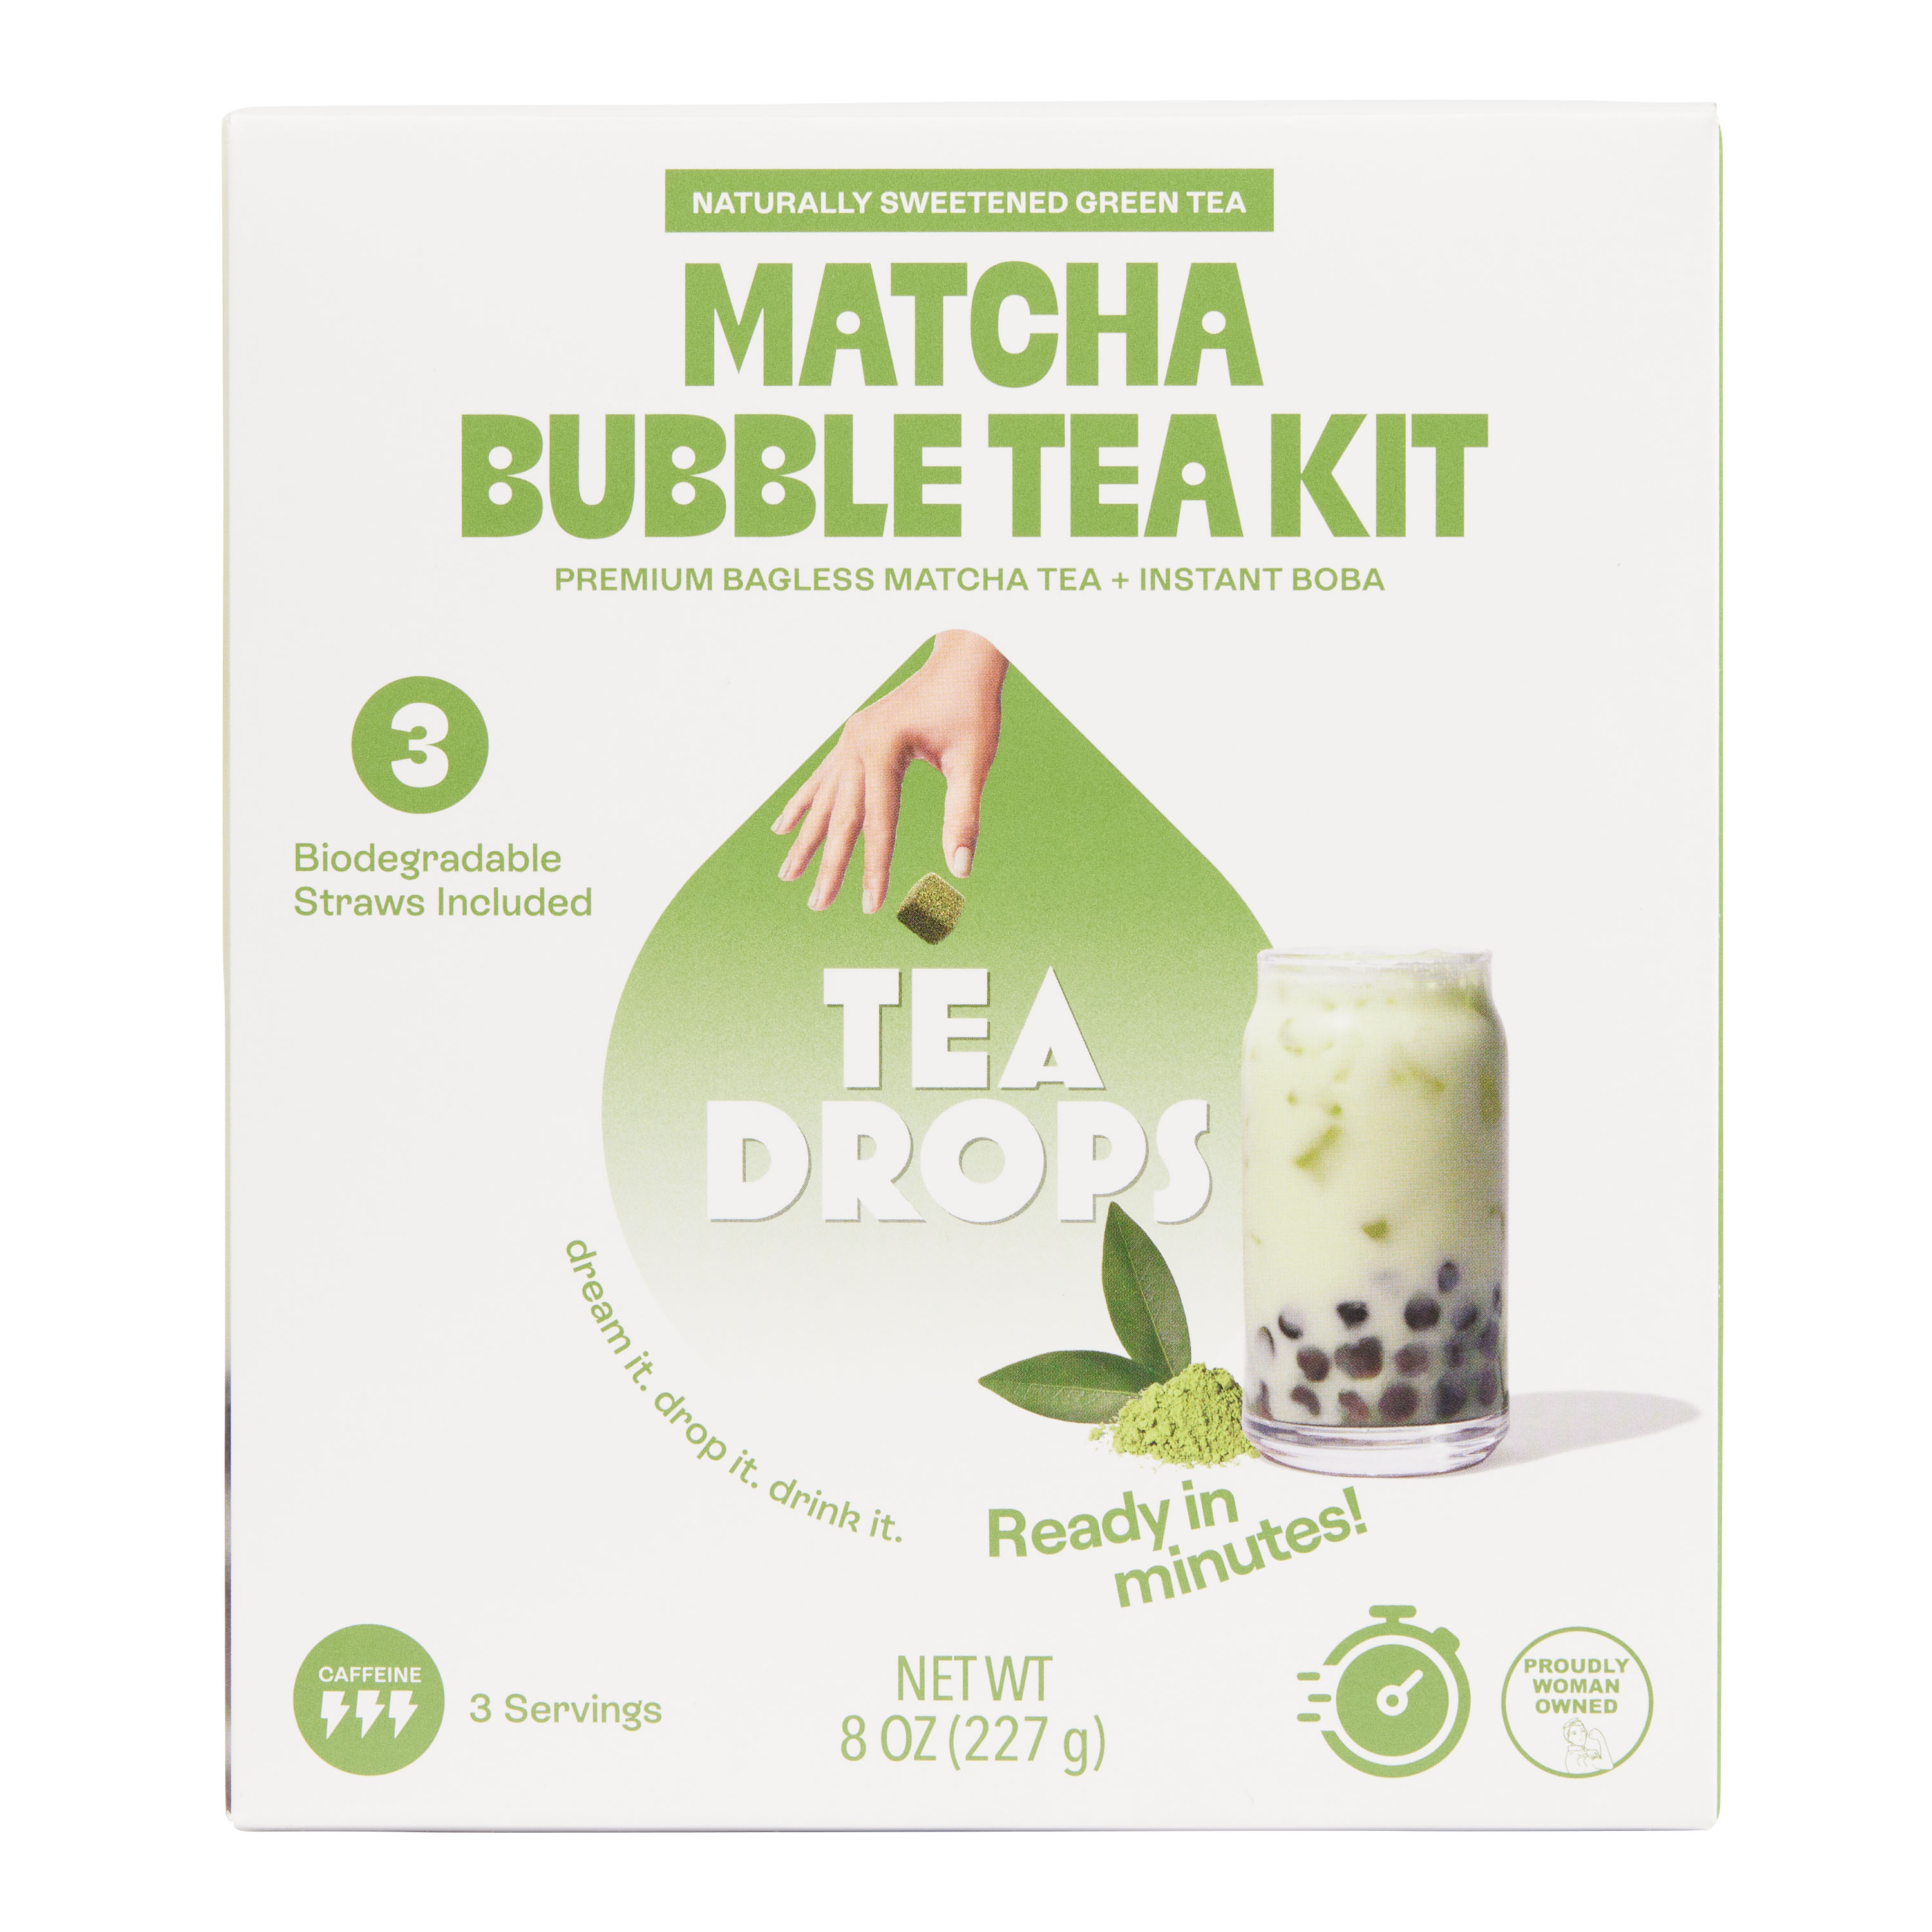 Matcha Entry Kit – Complete Matcha tools for Starters (Includes